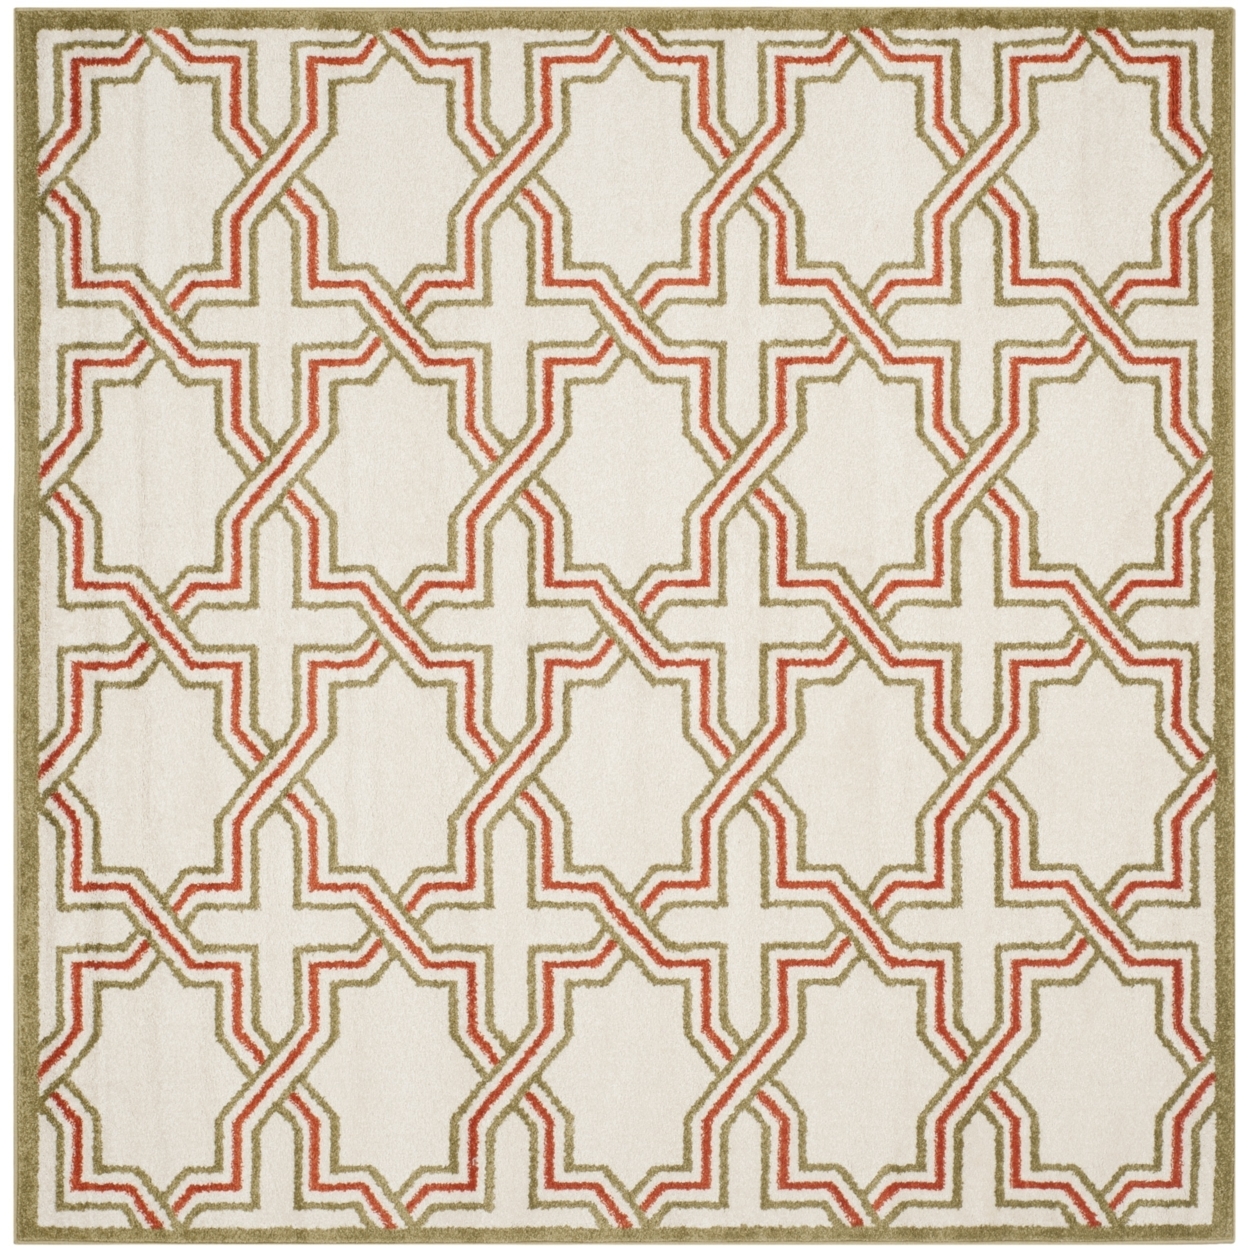 SAFAVIEH Amherst AMT413A Ivory / Light Green Rug - 7' Square